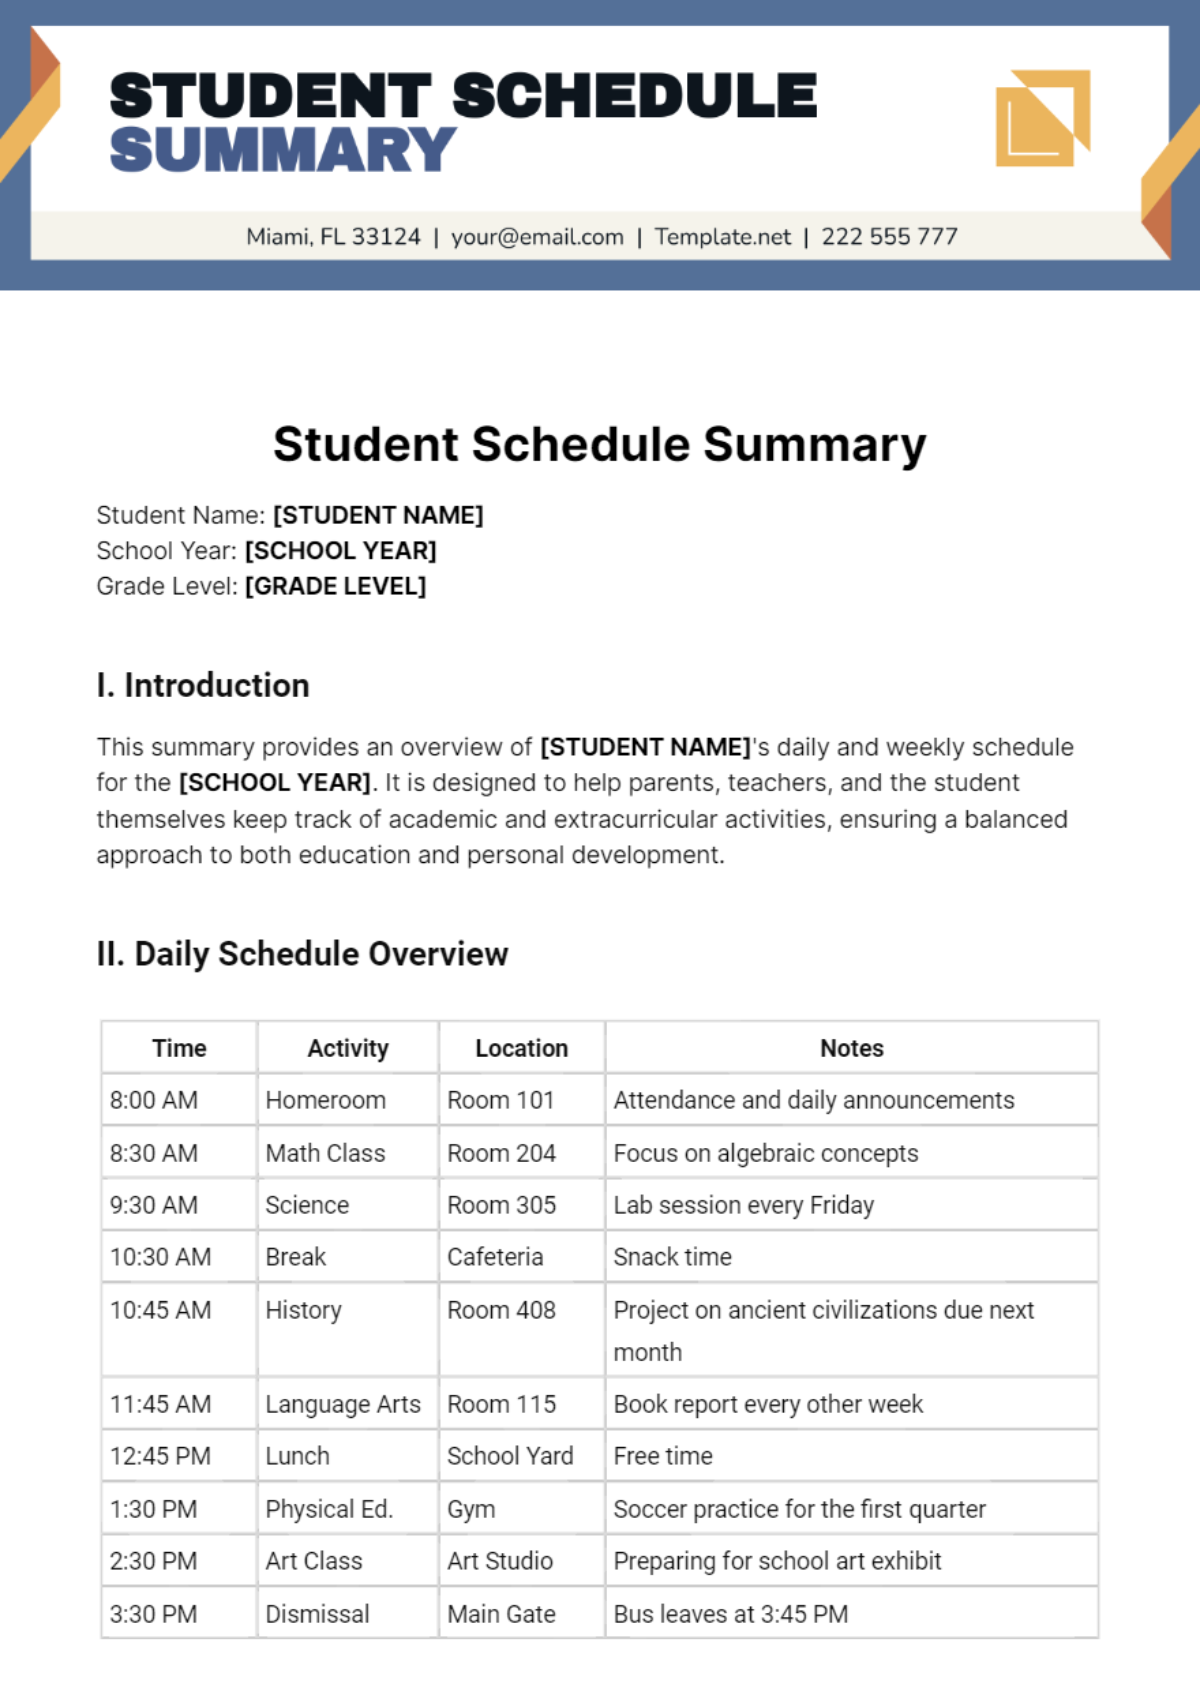 Student Schedule Summary Template